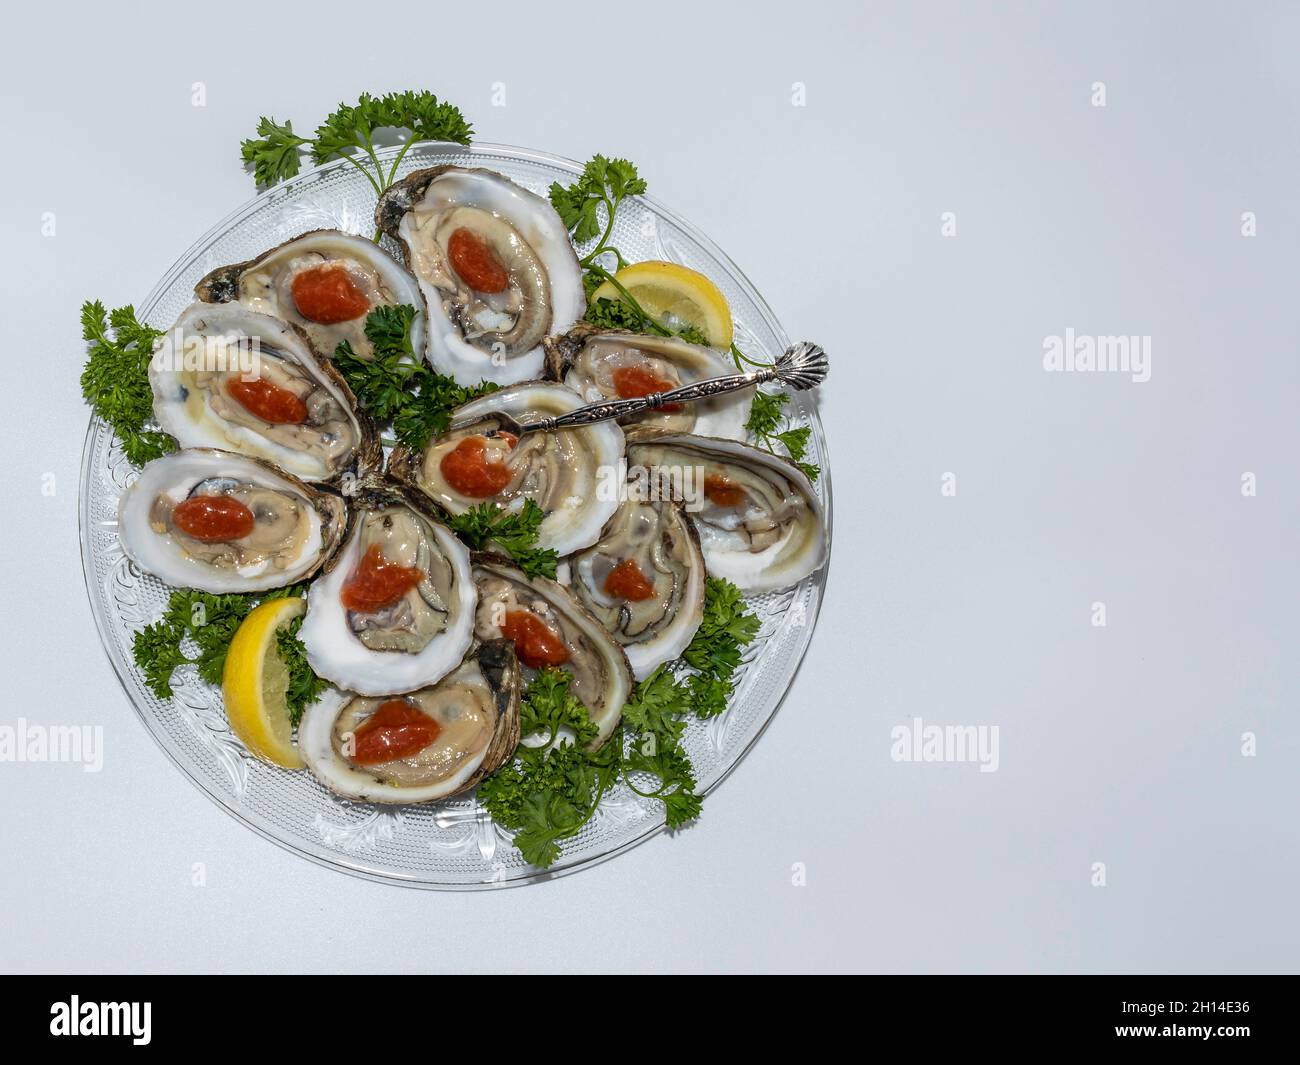 Oysters on the half-shell served with colorful garnishes on a white background. Stock Photo